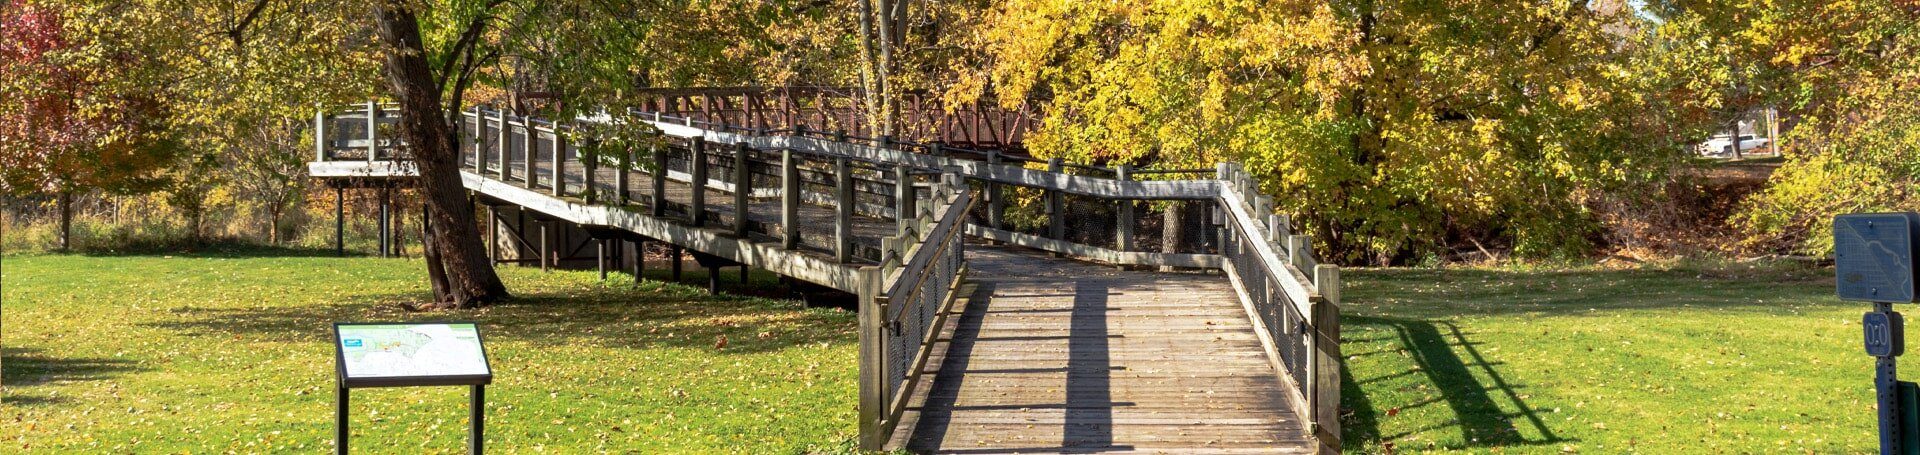 This is an image of a wooden walkway in Hastings Michigan